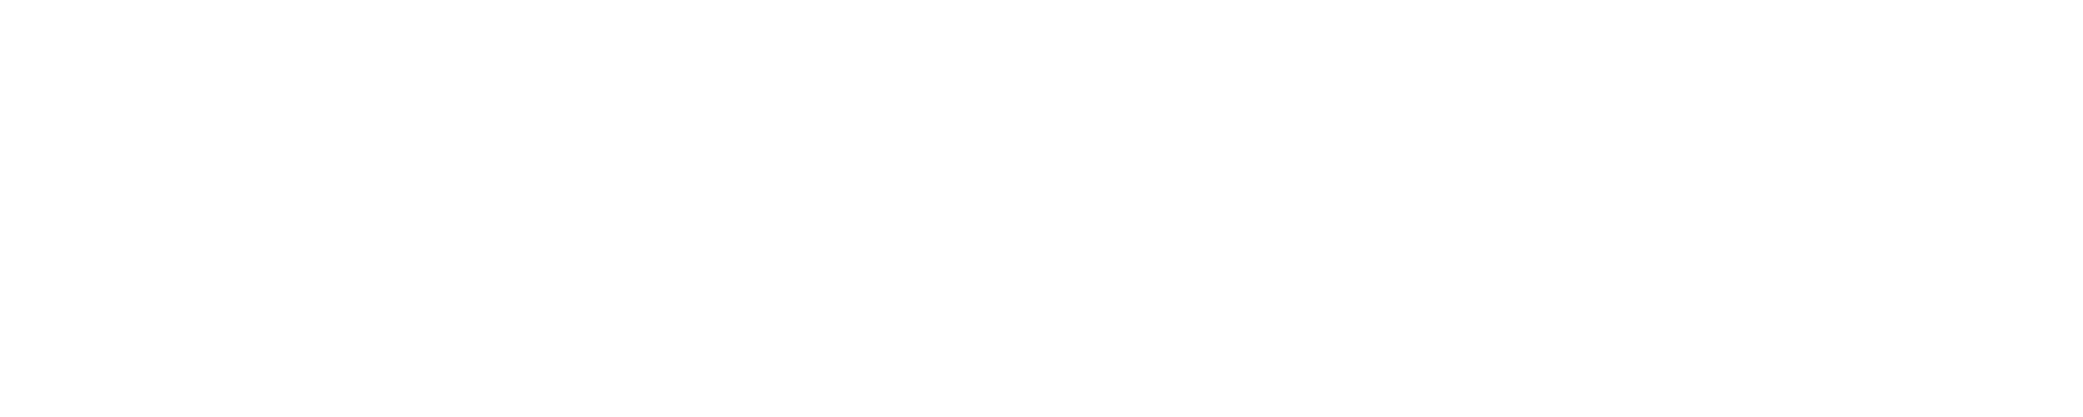 Litwin Group Logo - large white